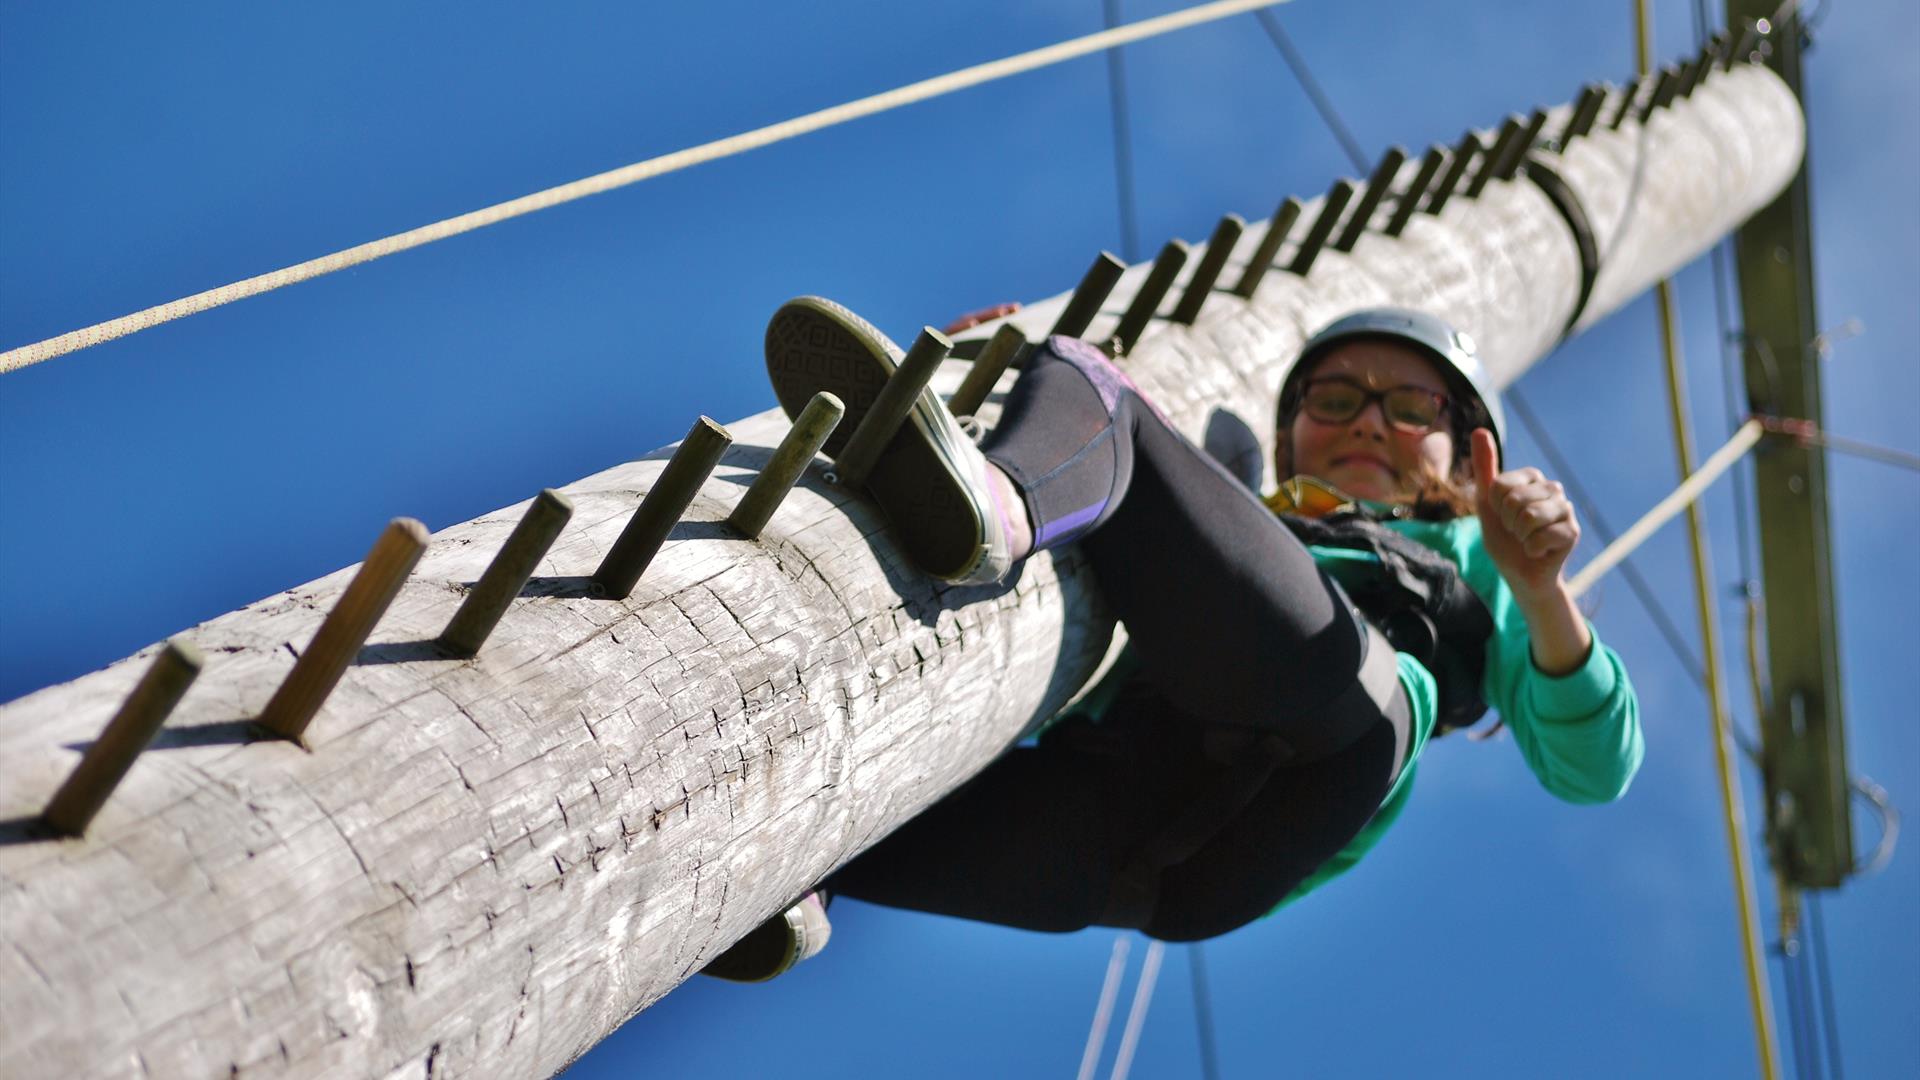 A young girl climbing up a wooden climbing pole wearing protective clothing